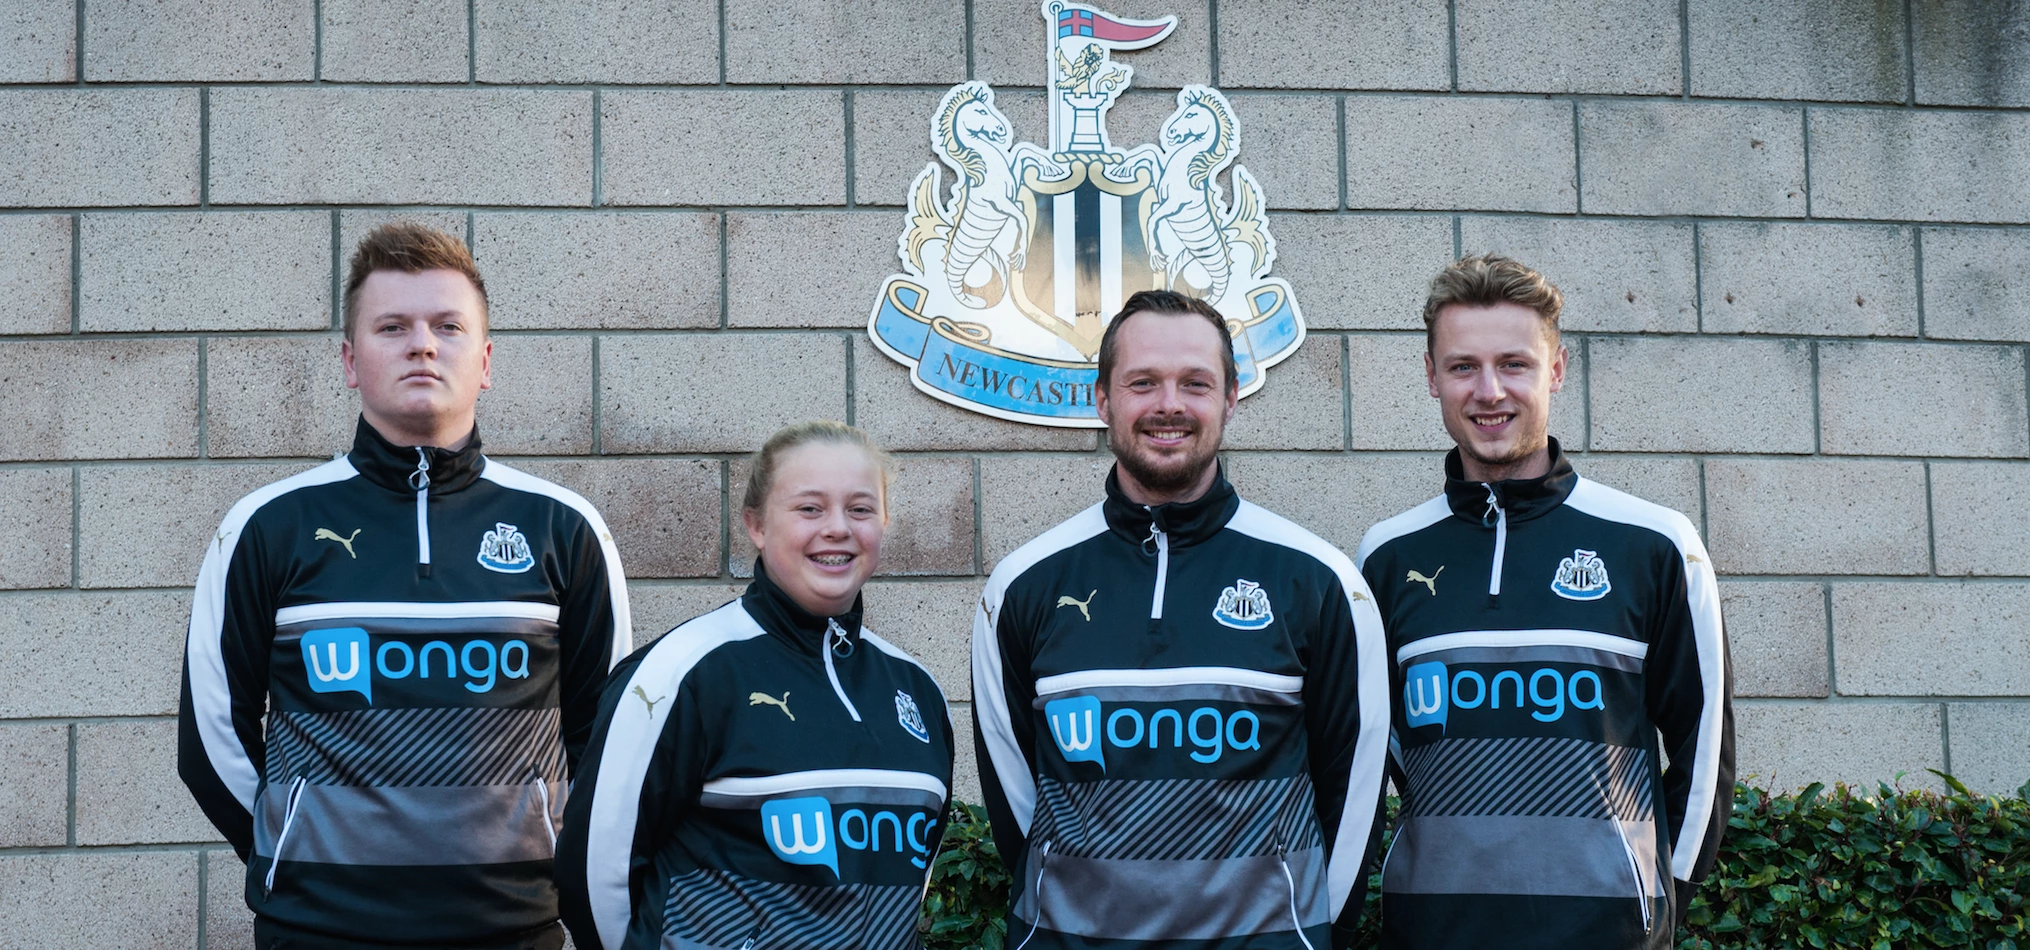 TyneMet students working at Newcastle United Foundation